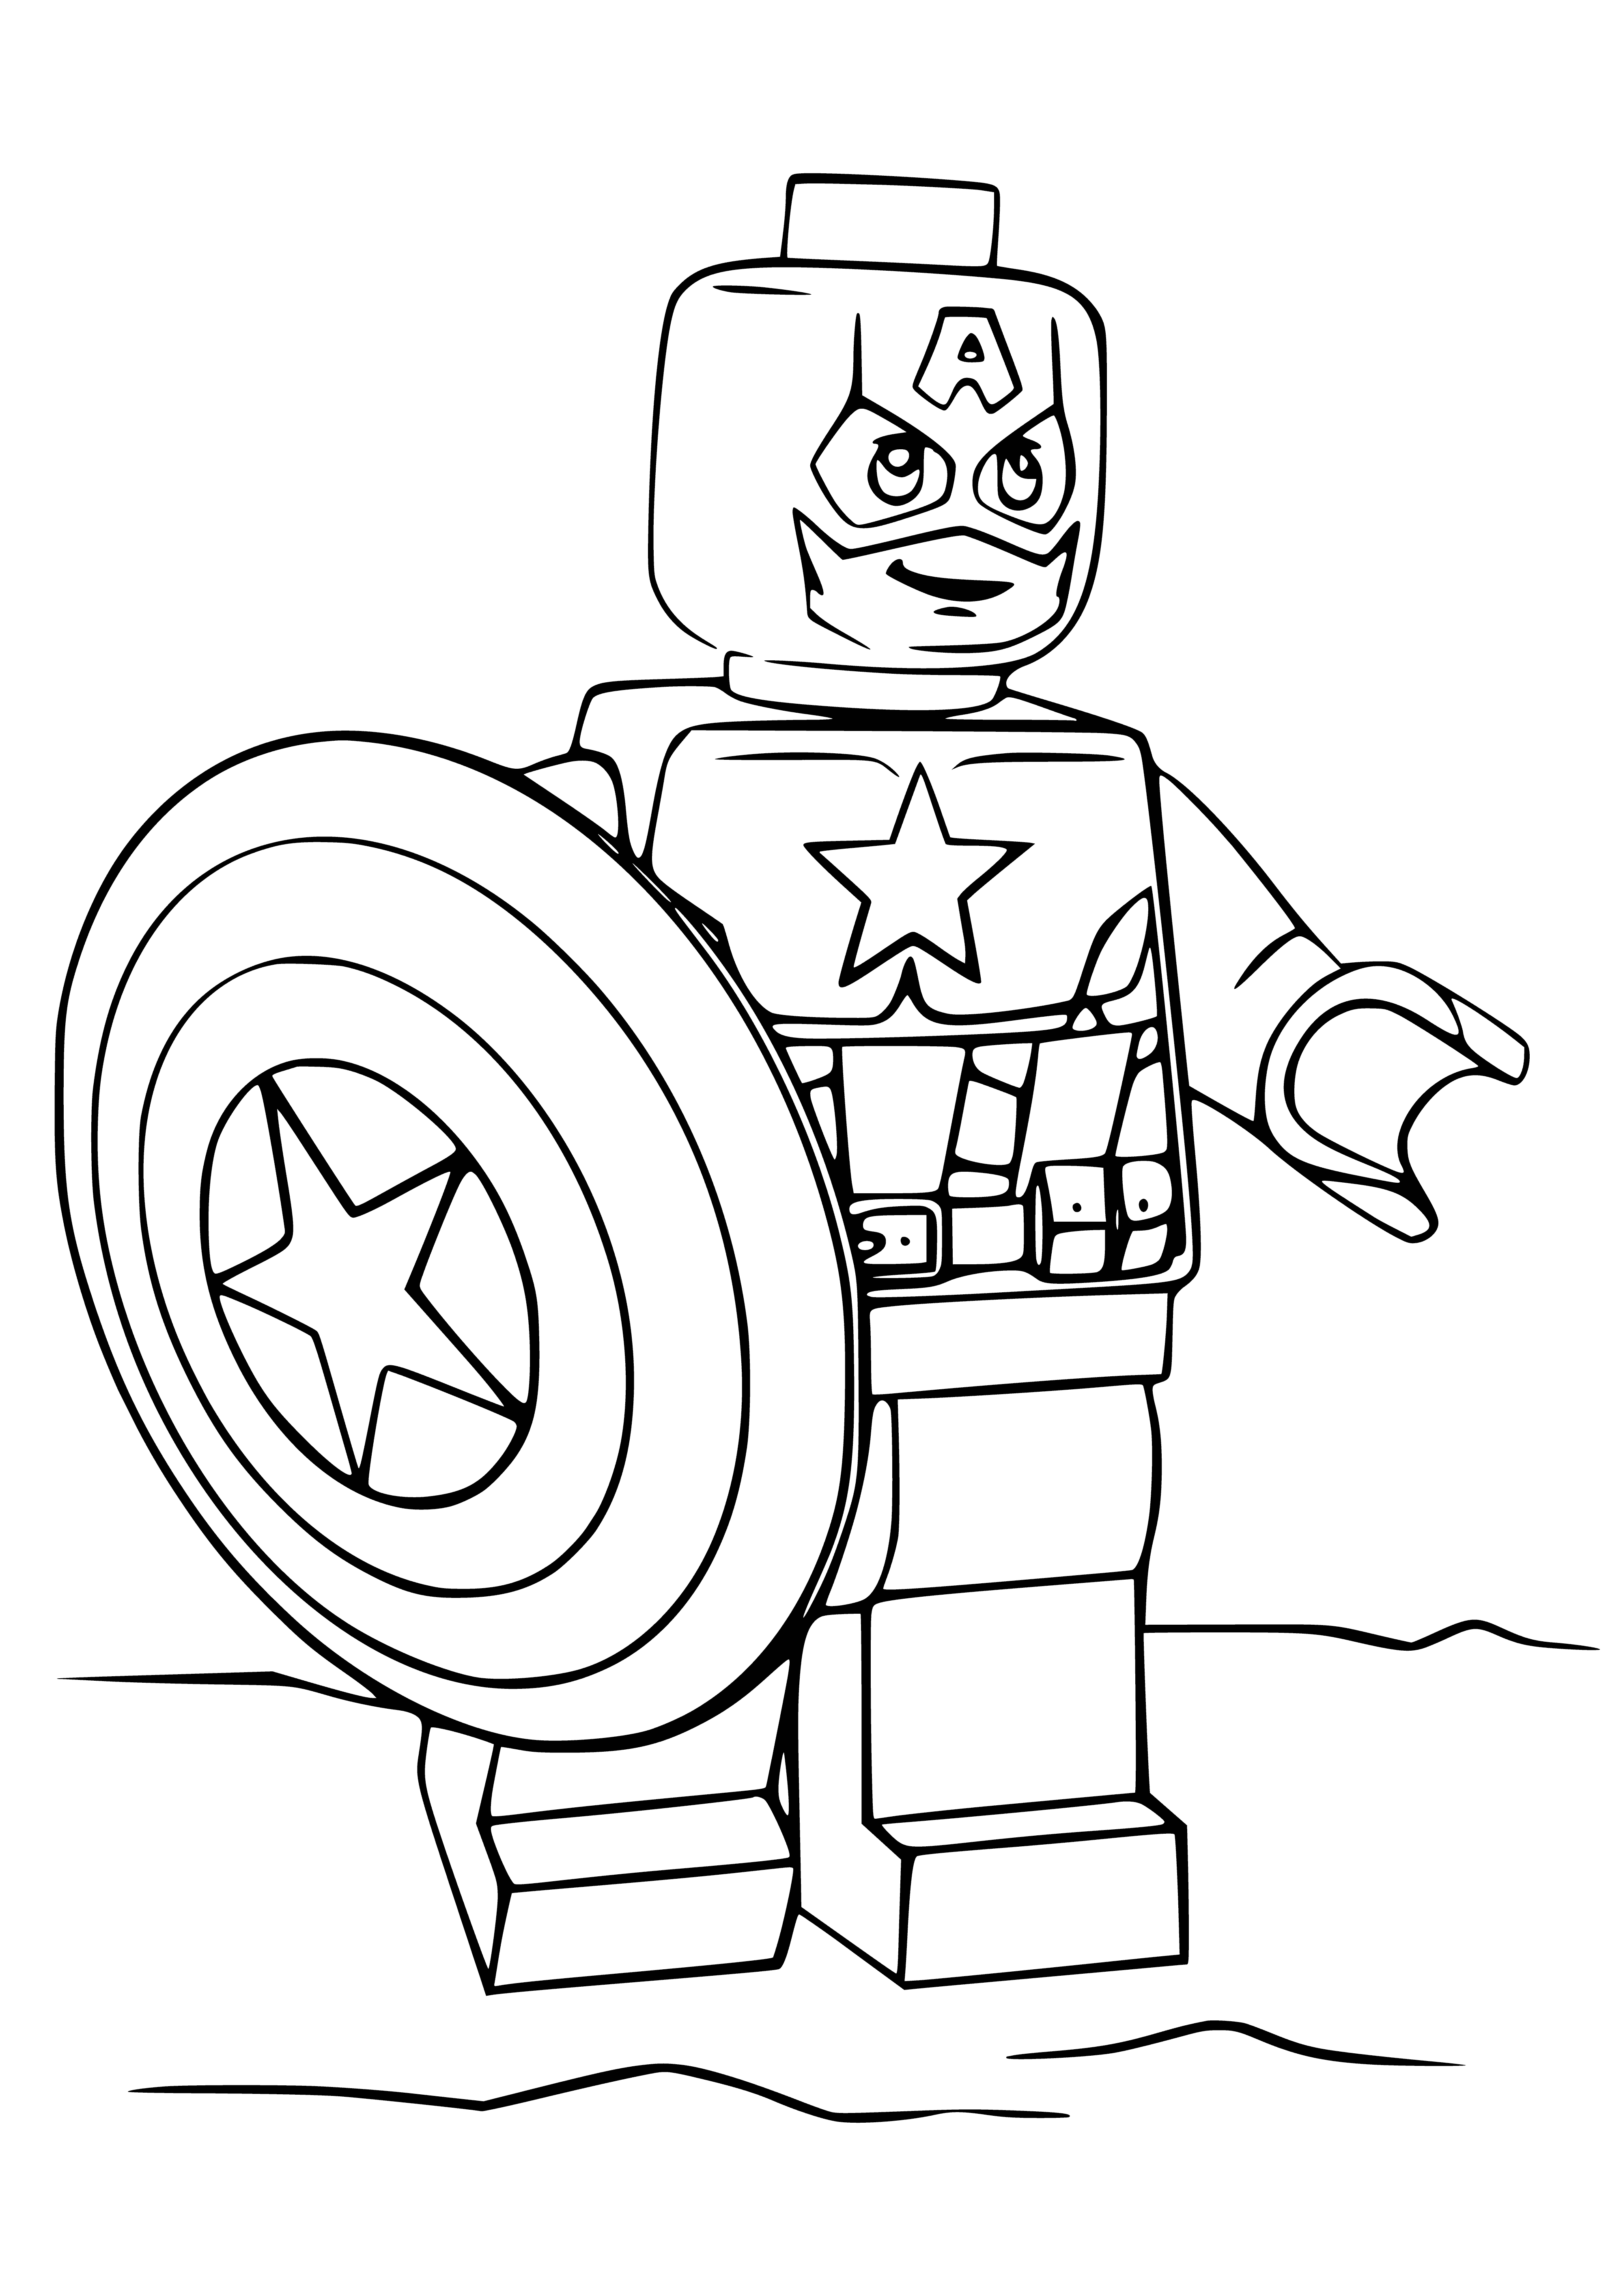 Captain America coloring page